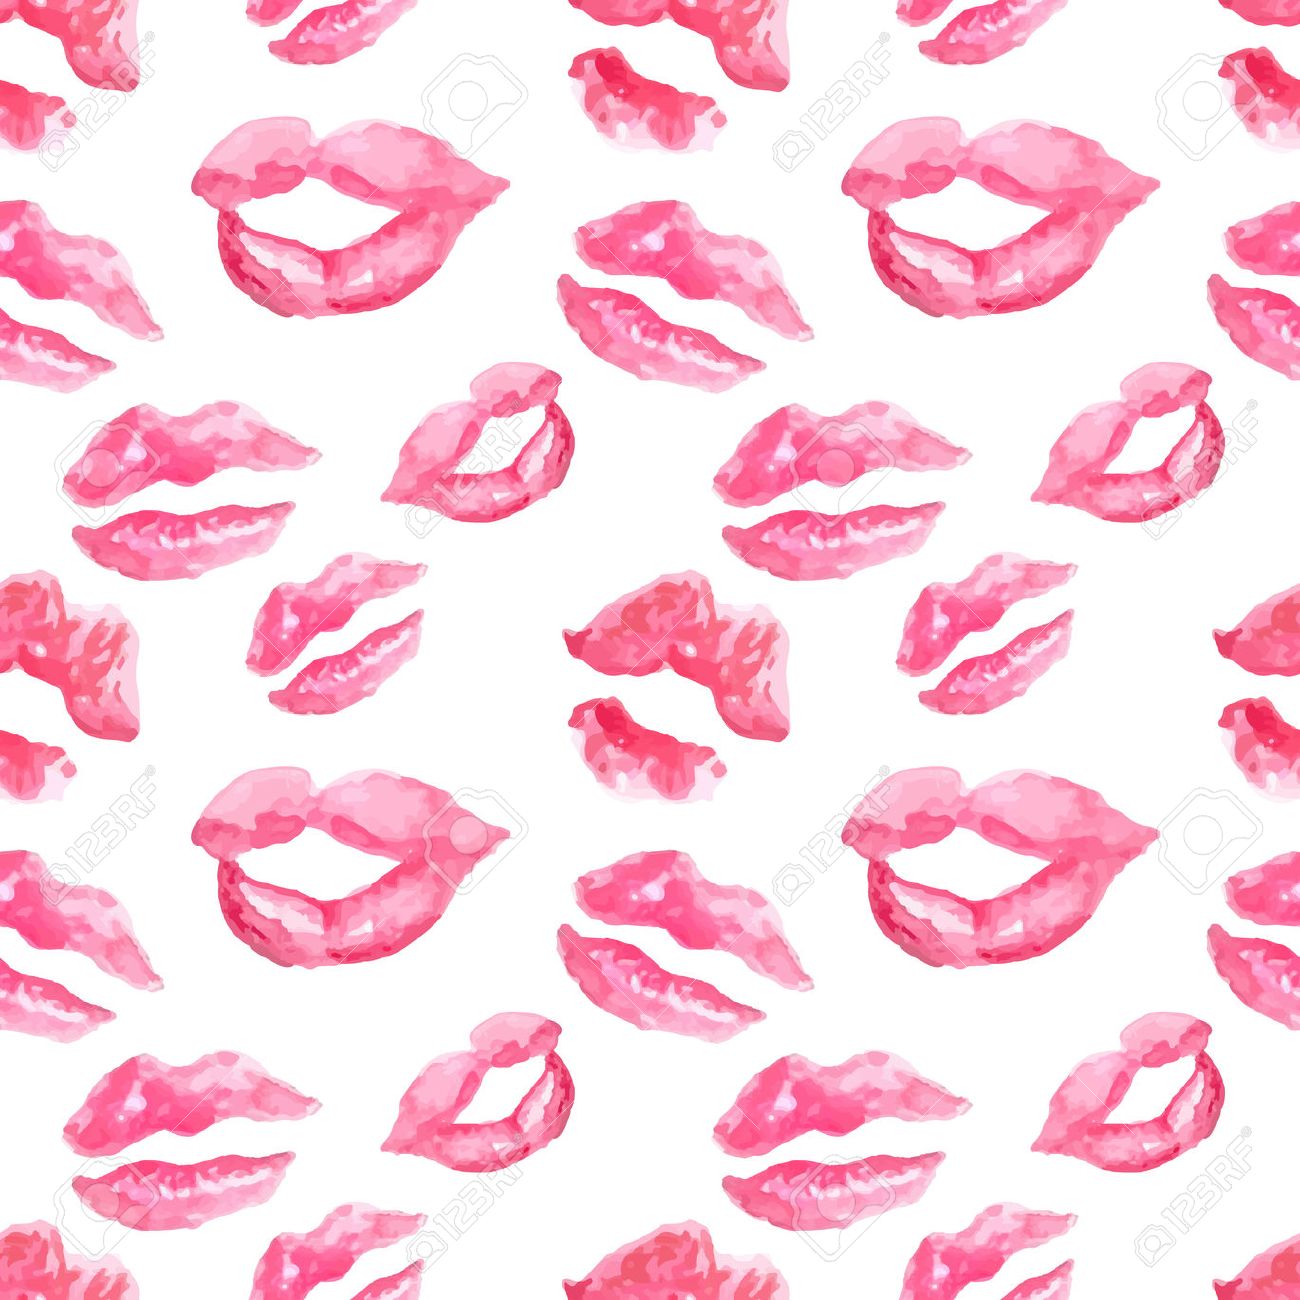 Seamless Pattern With A Lipstick Kiss Prints On White Background